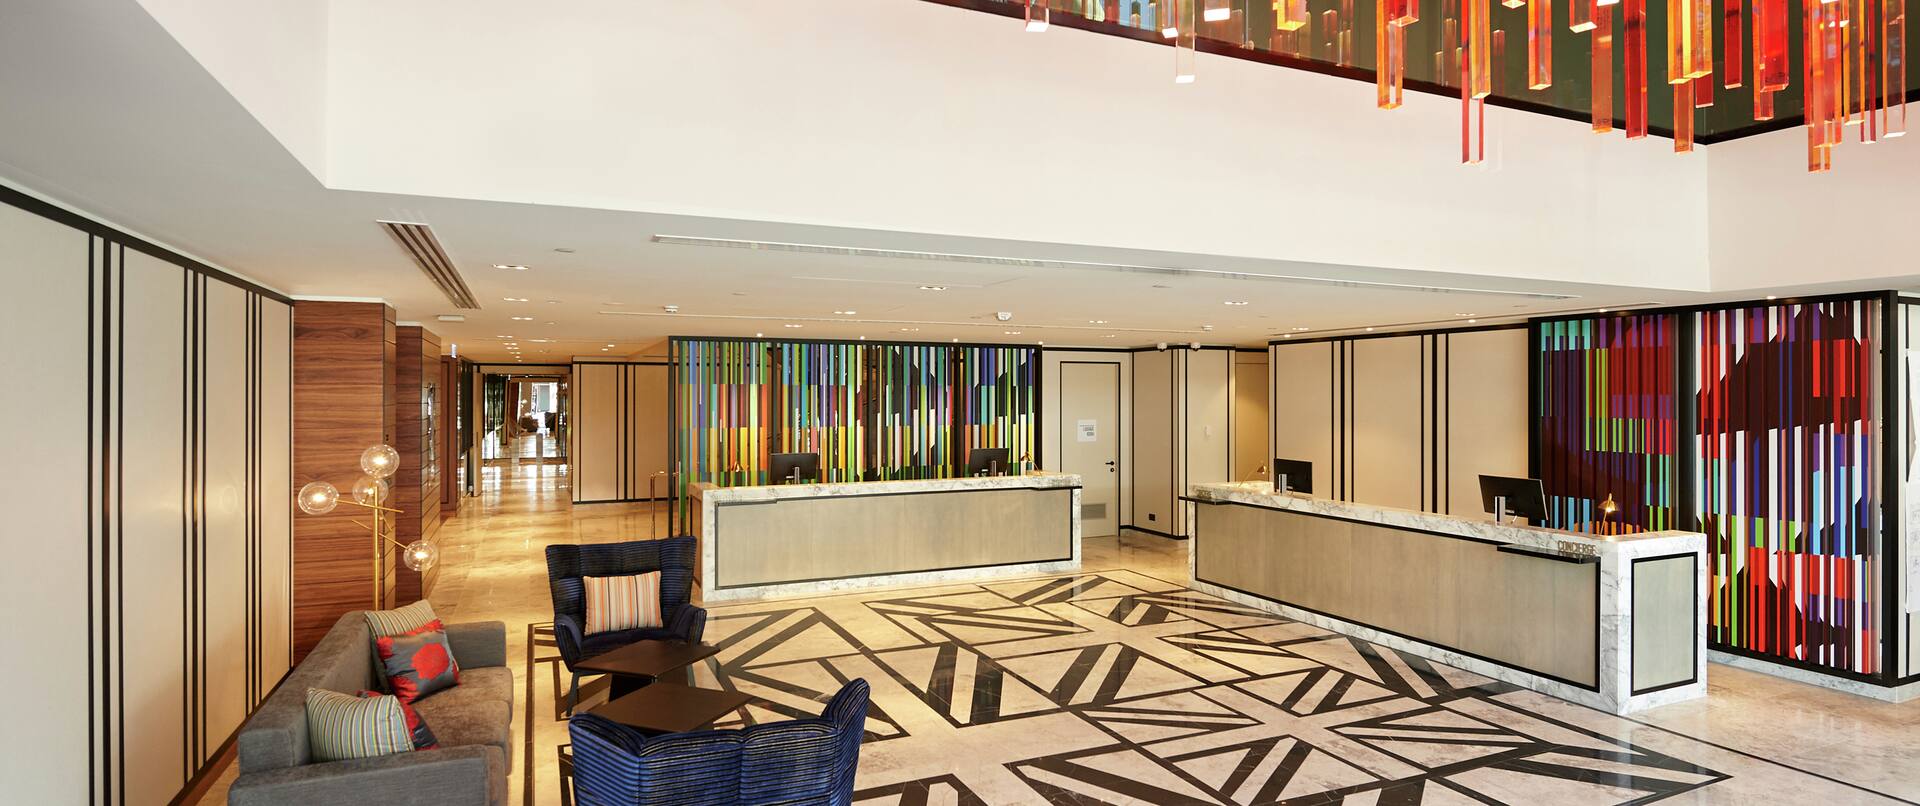 Lobby with Architectural Detail, Couches, Pillows, and Room Technology